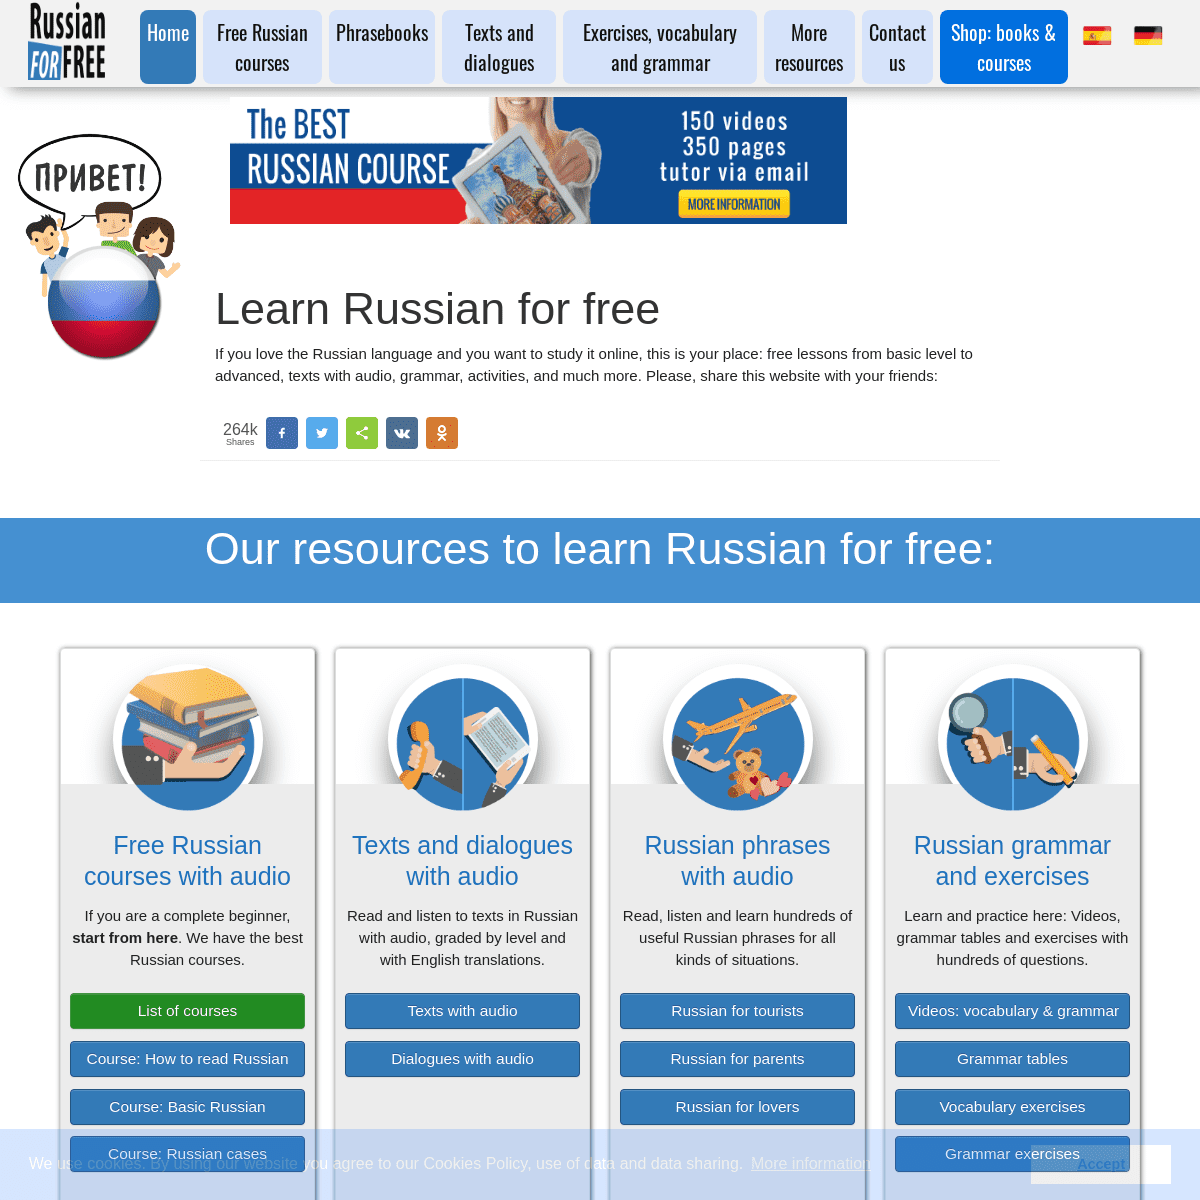 A complete backup of https://russianforfree.com